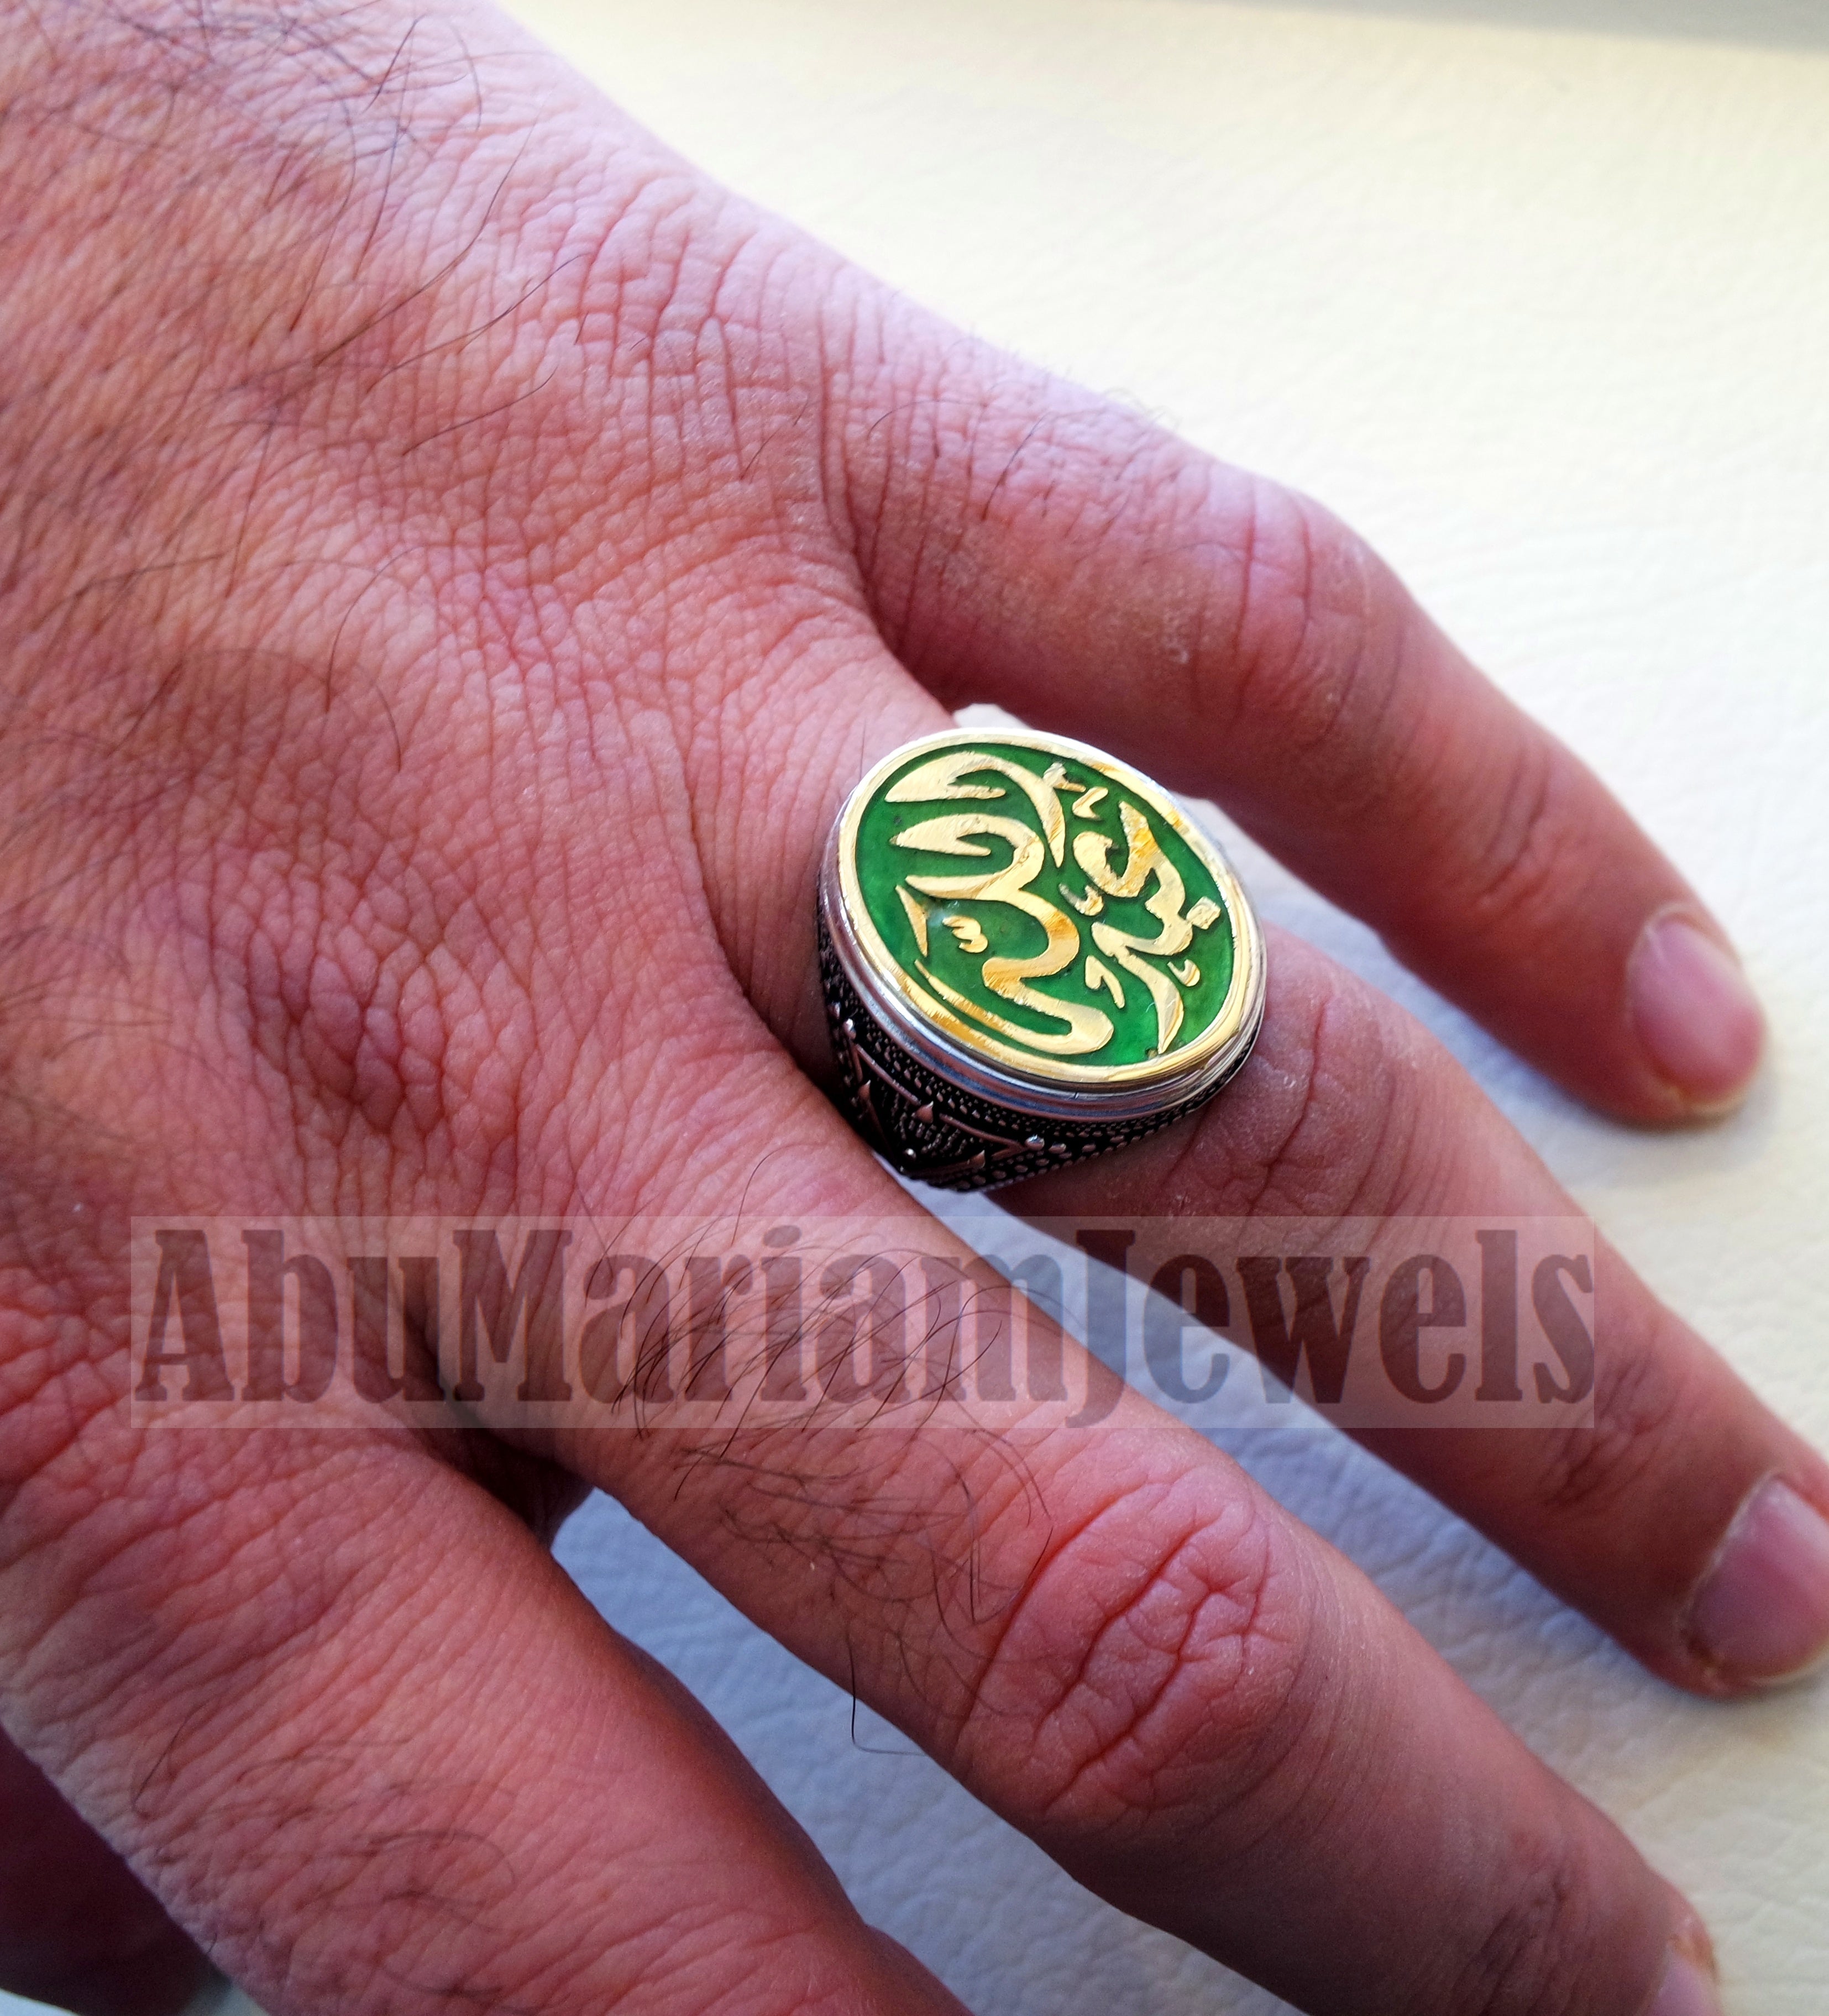 Customized Arabic calligraphy names ring personalized sterling silver 925 and bronze with green enamel TSE1002 خاتم اسم تفصيل